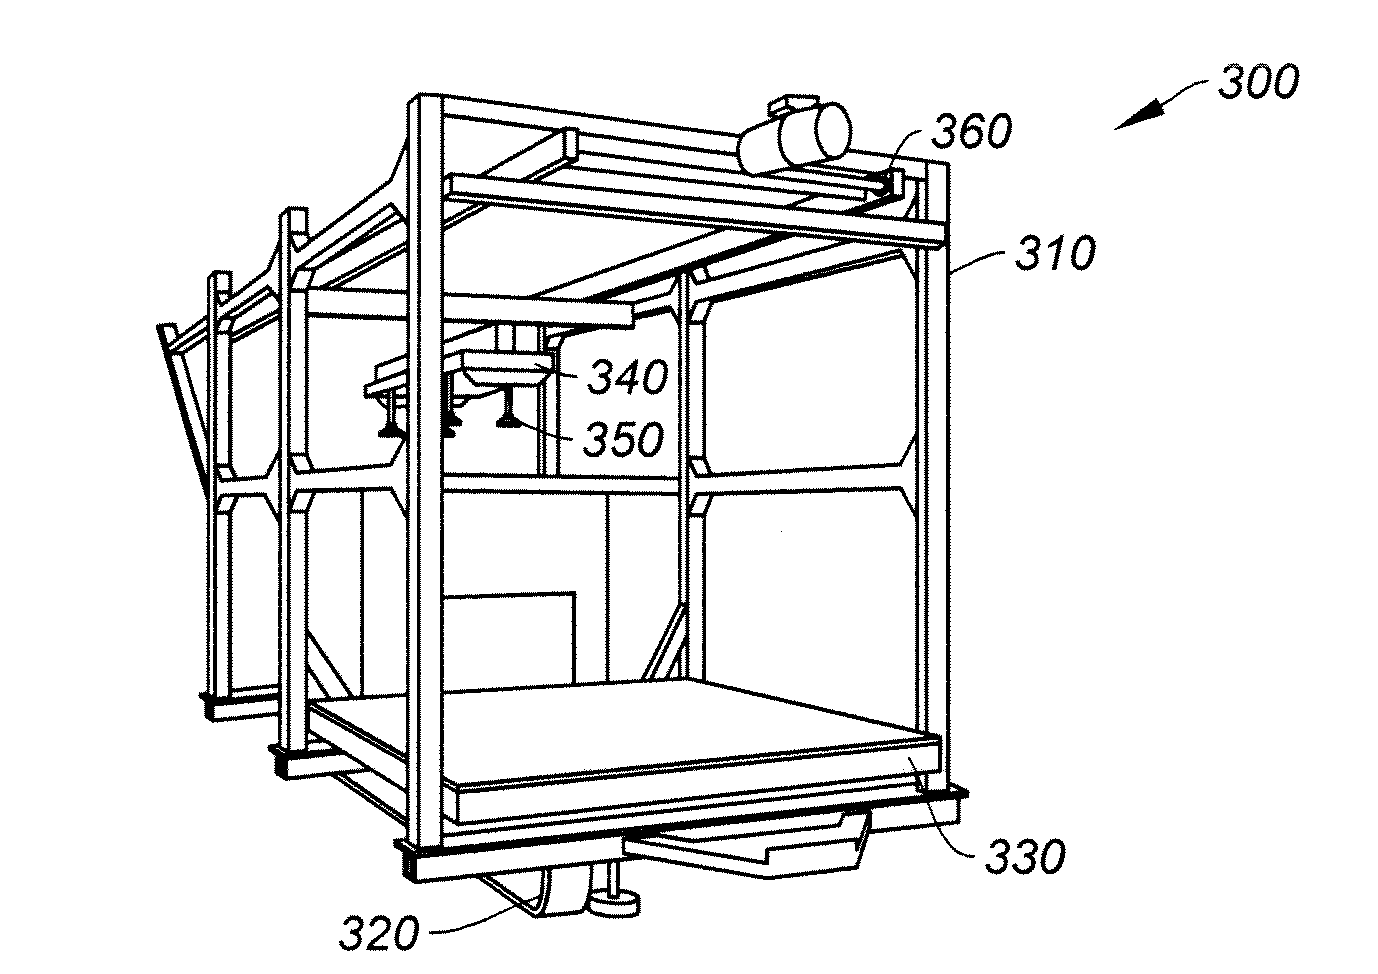 Vehicles and methods for magnetically managing legs of rail-based photovoltaic modules during installation